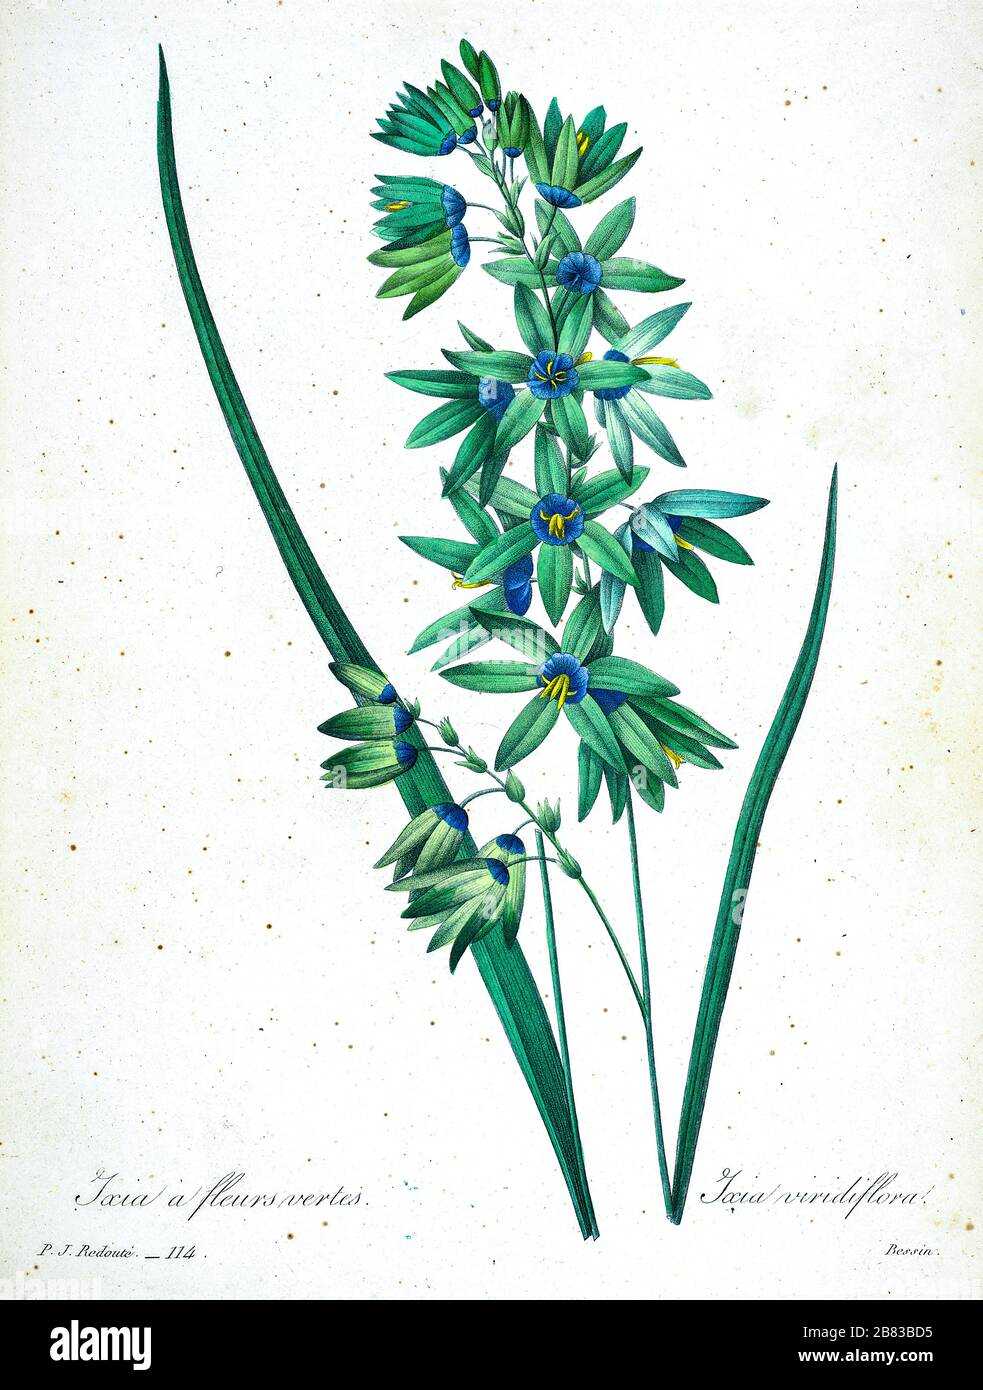 19th-century hand painted Engraving illustration of a Turquoise Ixia (Ixia viridiflora). Aquamarine to sea-green flowers with purple centers. by Pierre-Joseph Redoute. Published in Choix Des Plus Belles Fleurs, Paris (1827). by Redouté, Pierre Joseph, 1759-1840.; Chapuis, Jean Baptiste.; Ernest Panckoucke.; Langois, Dr.; Bessin, R.; Victor, fl. ca. 1820-1850. Stock Photo